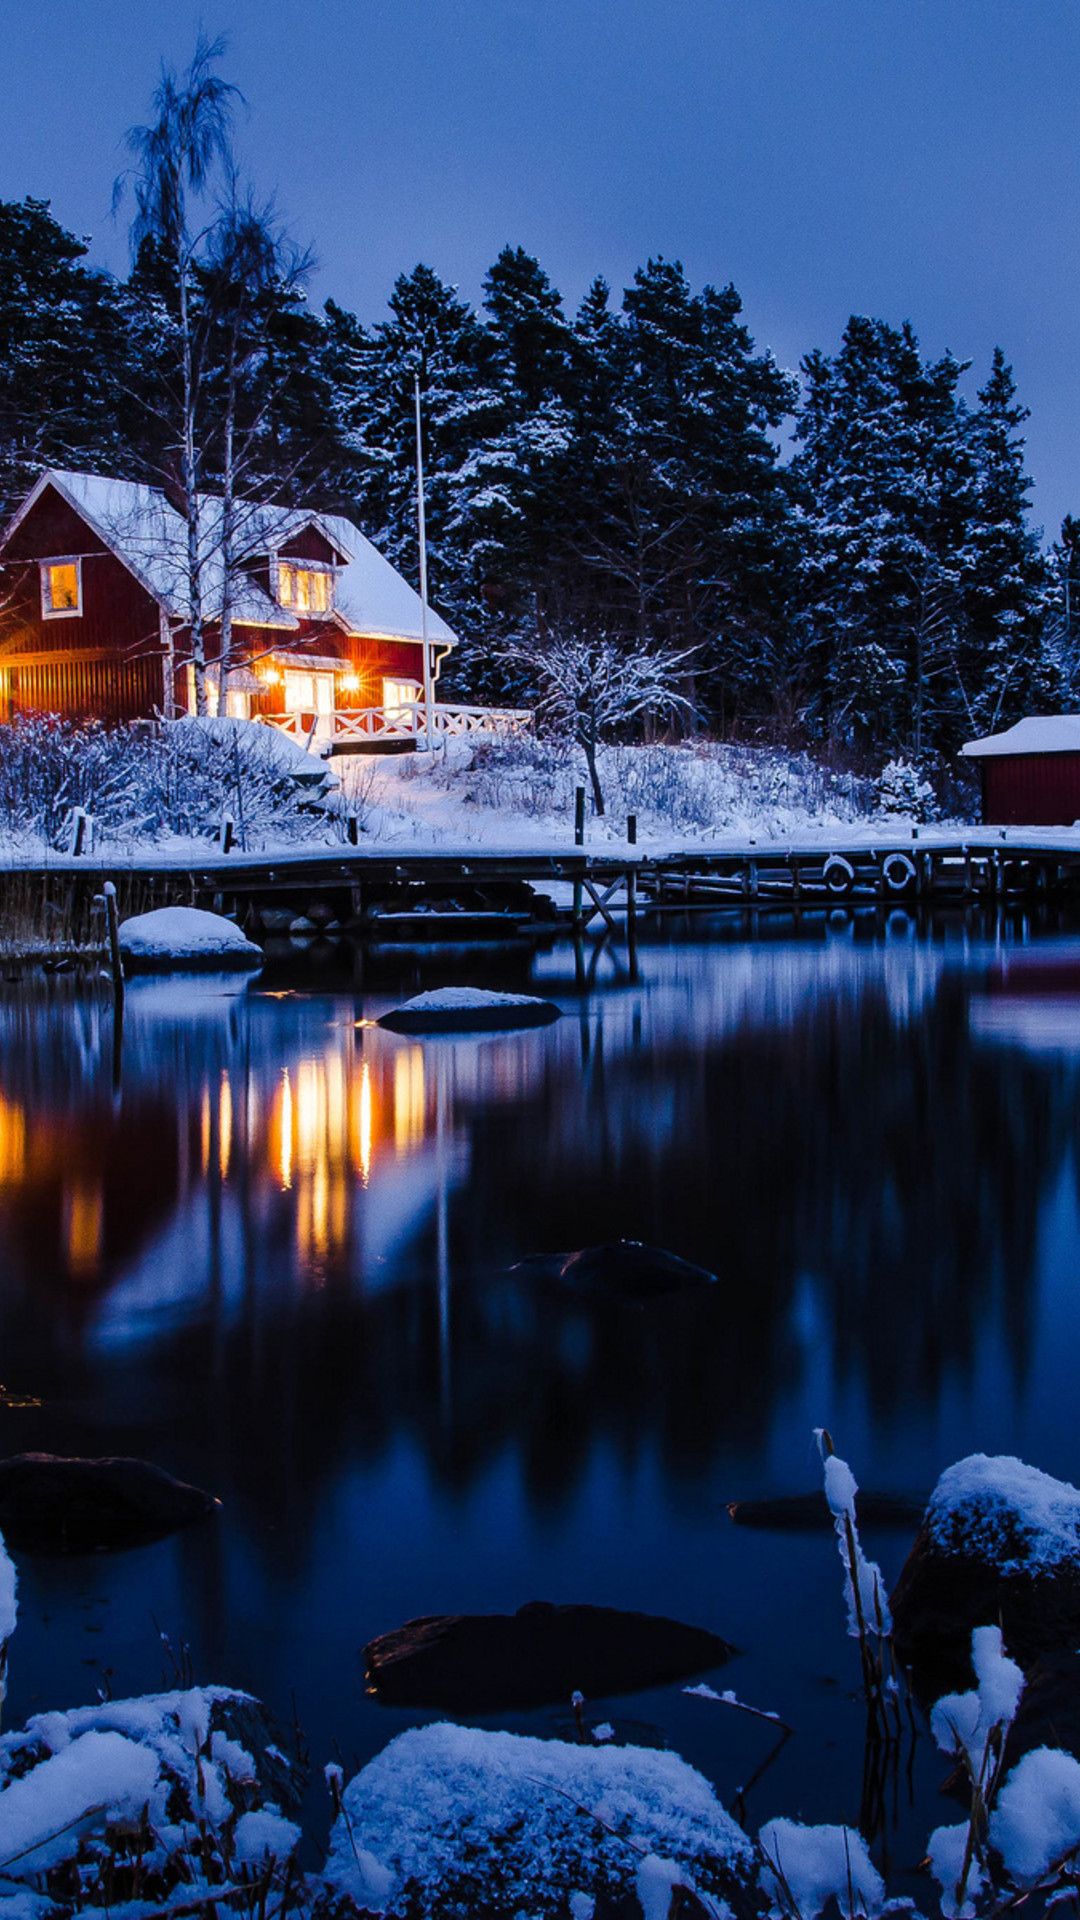 Wallpaper Download Winter Holiday Night At The Cottage - Winter Night , HD Wallpaper & Backgrounds